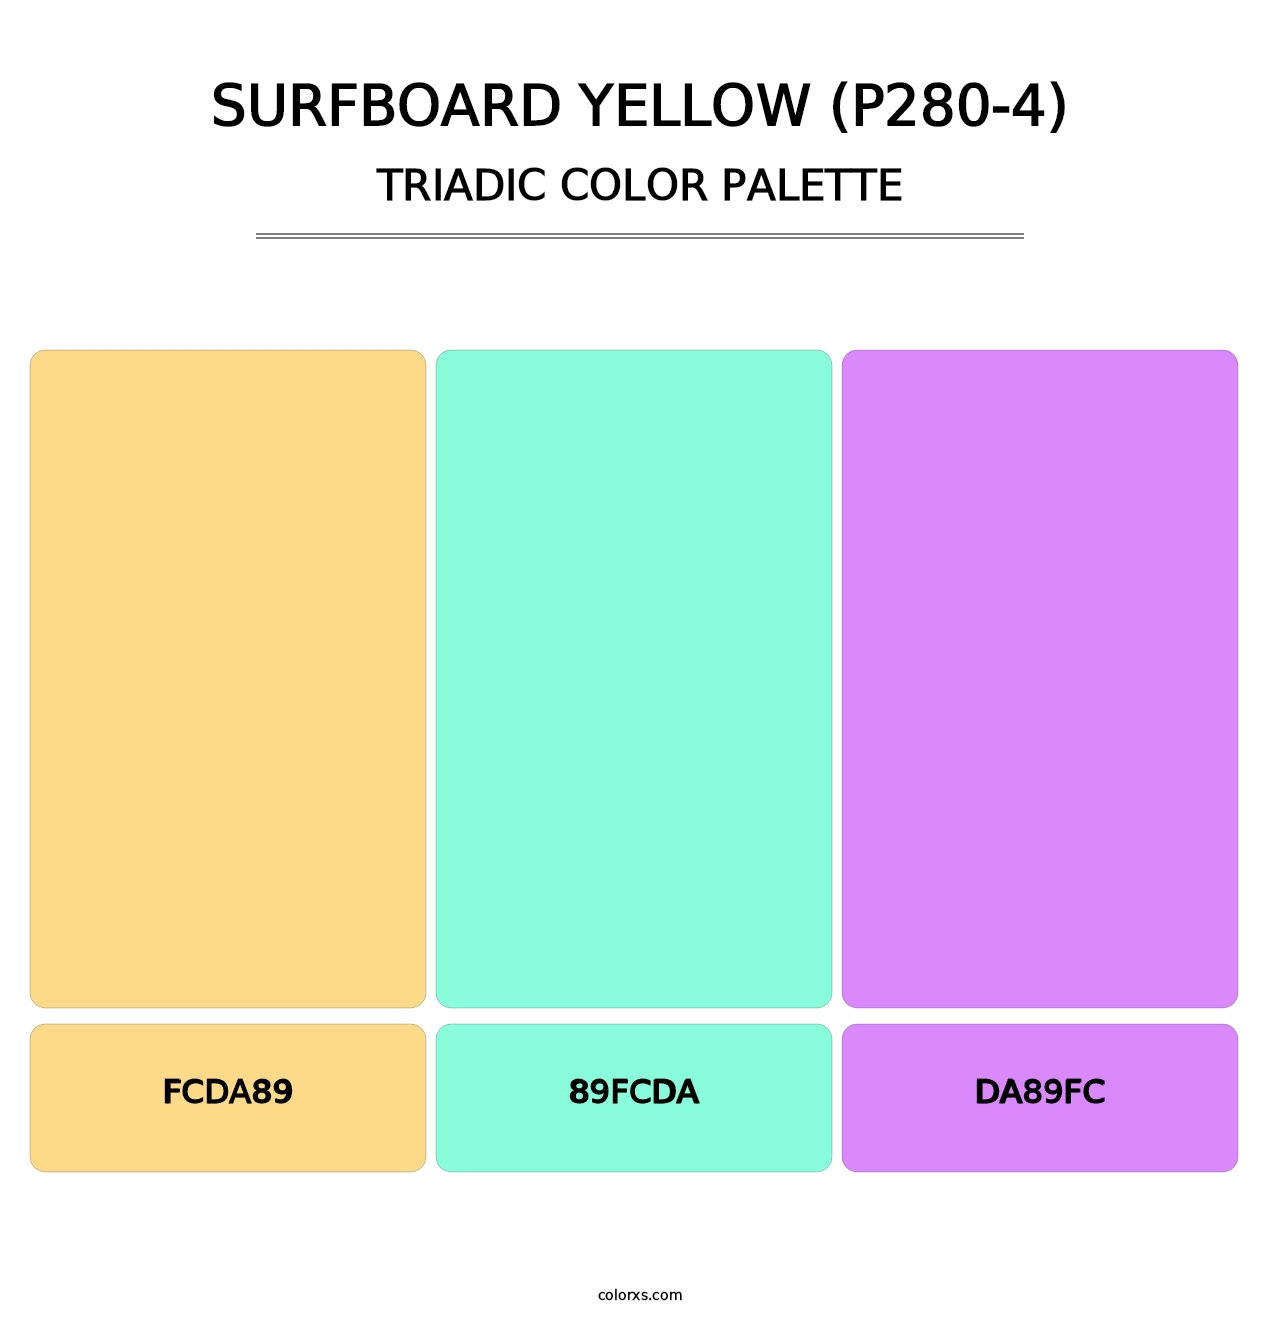 Surfboard Yellow (P280-4) - Triadic Color Palette